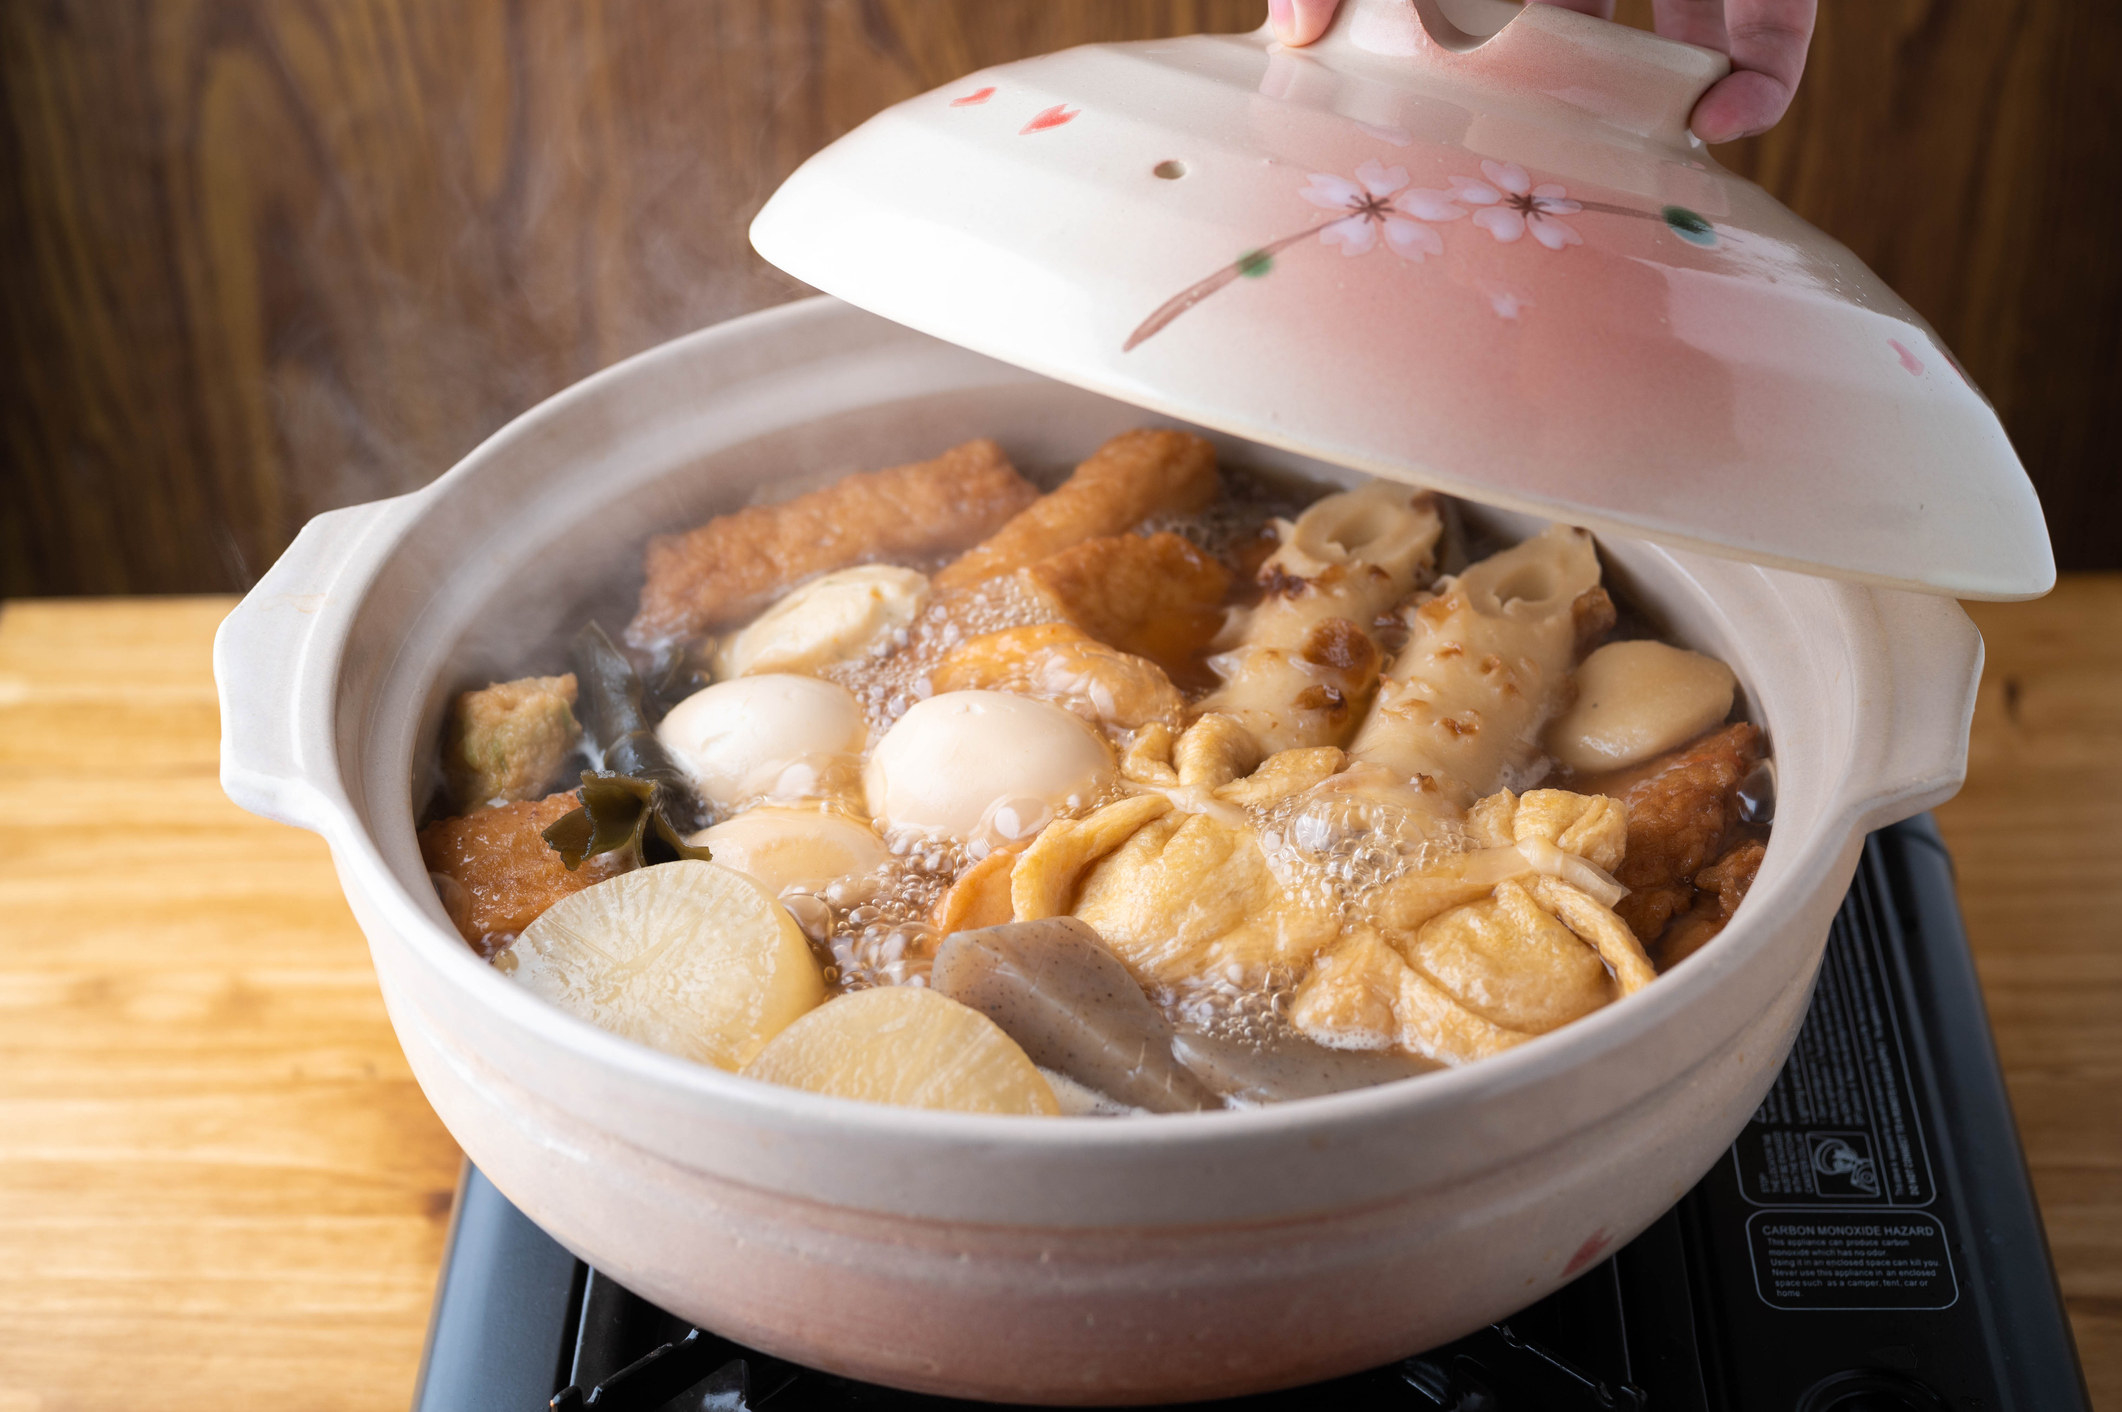 Hot soup in a ceramic bowl that contains various Japanese vegetables and fish cakes